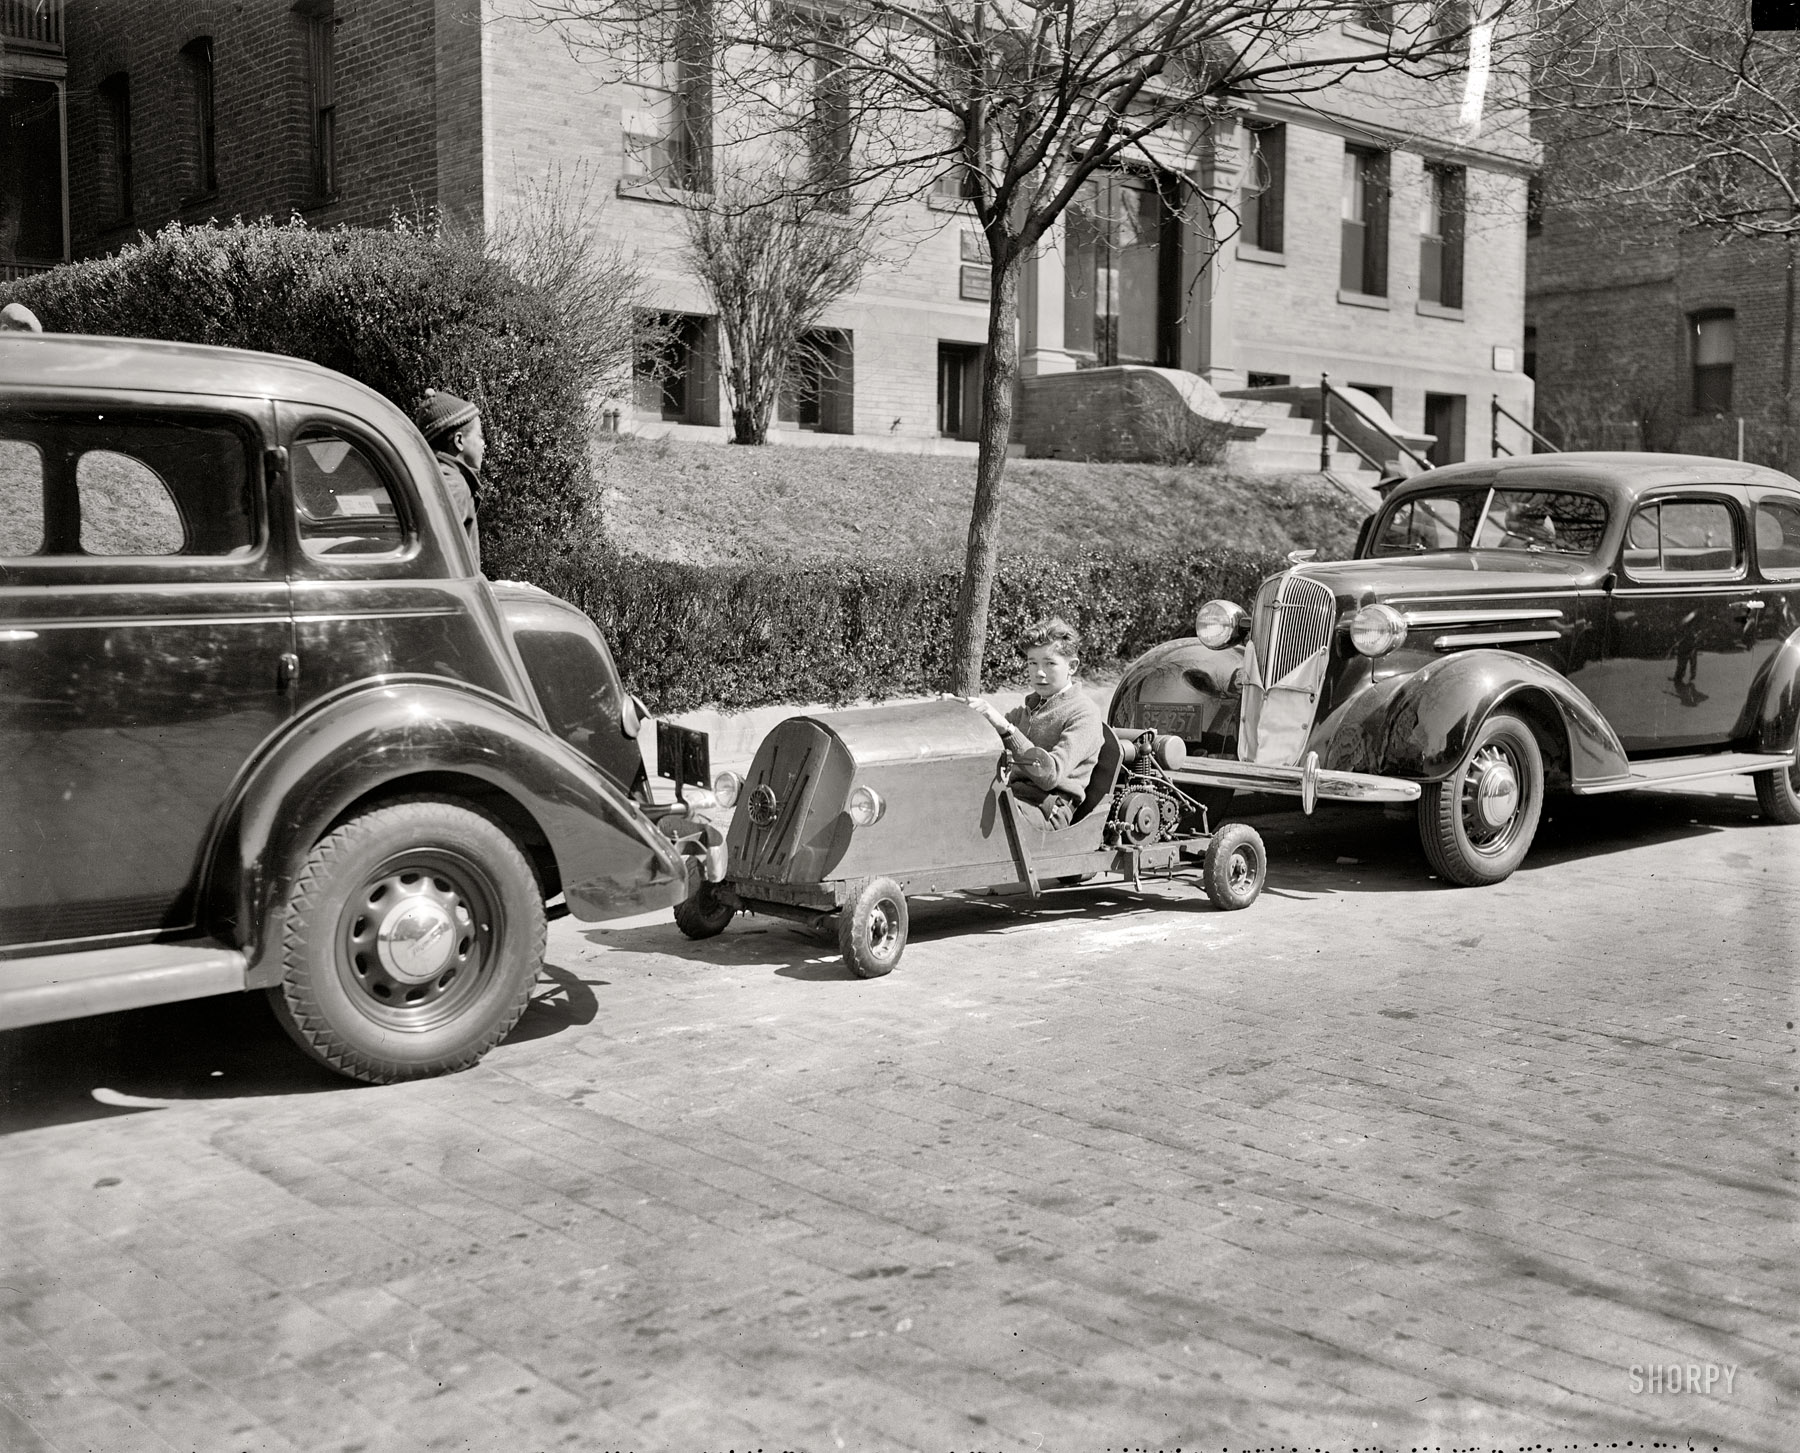 March 30, 1937. "Transportation and no parking worries. Nelm Clark, 16-year old Washington, D.C., youngster, solved this problem by combining a lawn mower motor with a set of motorcycle gears to make this unusual midget auto. Costing $60 to build, the contraption weighs only 150 pounds -- the weight is its main feature -- and if you run out of gas you easily push it or tuck it under your arm and walk home." Harris & Ewing Collection glass negative. View full size.